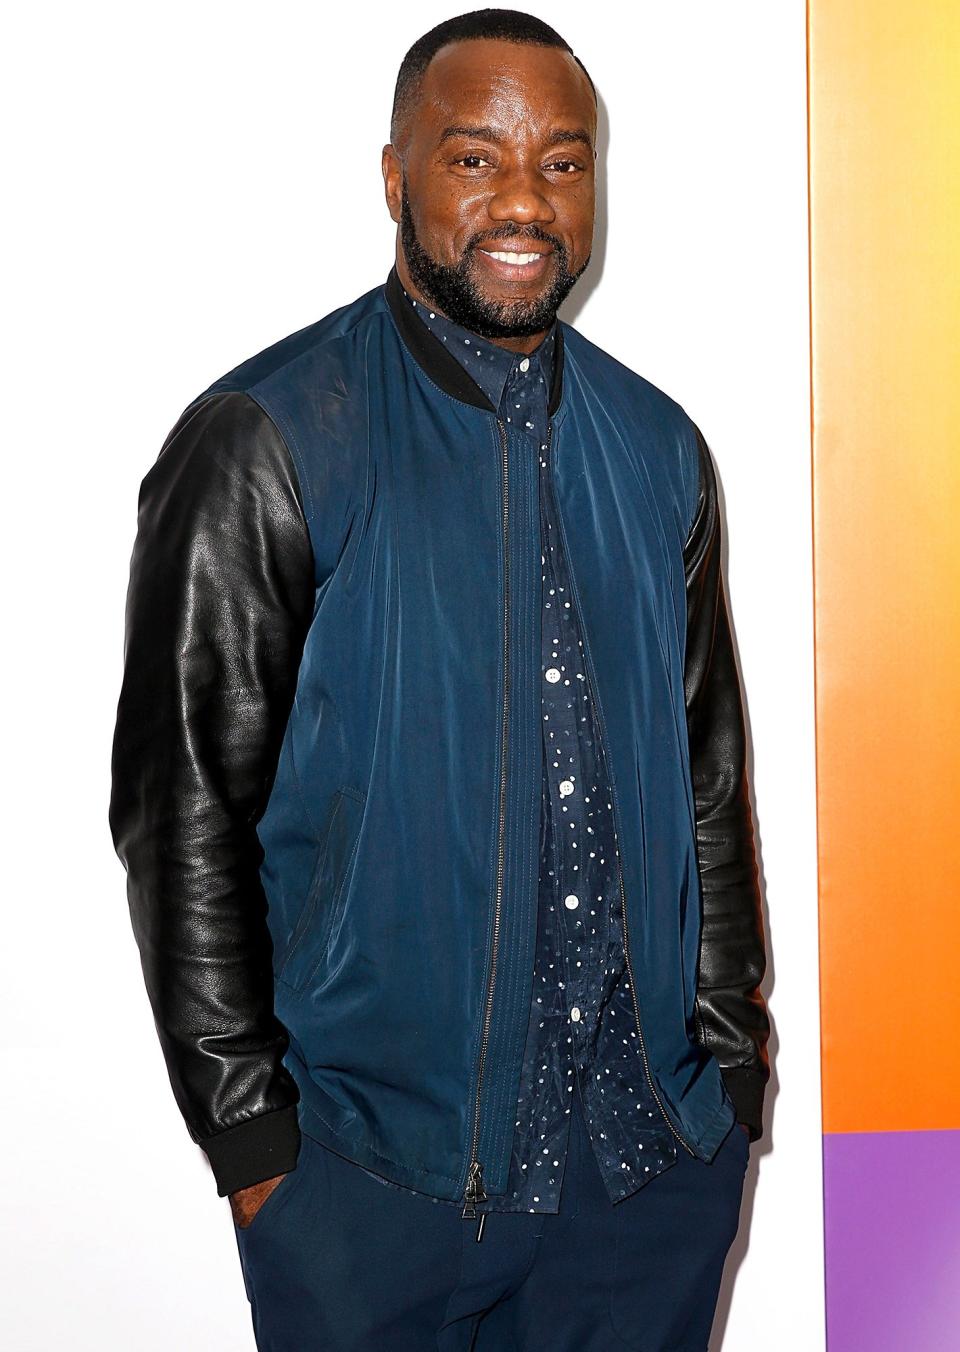 Cool Runnings Actor Malik Yoba Says He Is Attracted to Transgender Women: &#39;It&#39;s Time to Speak&#39;